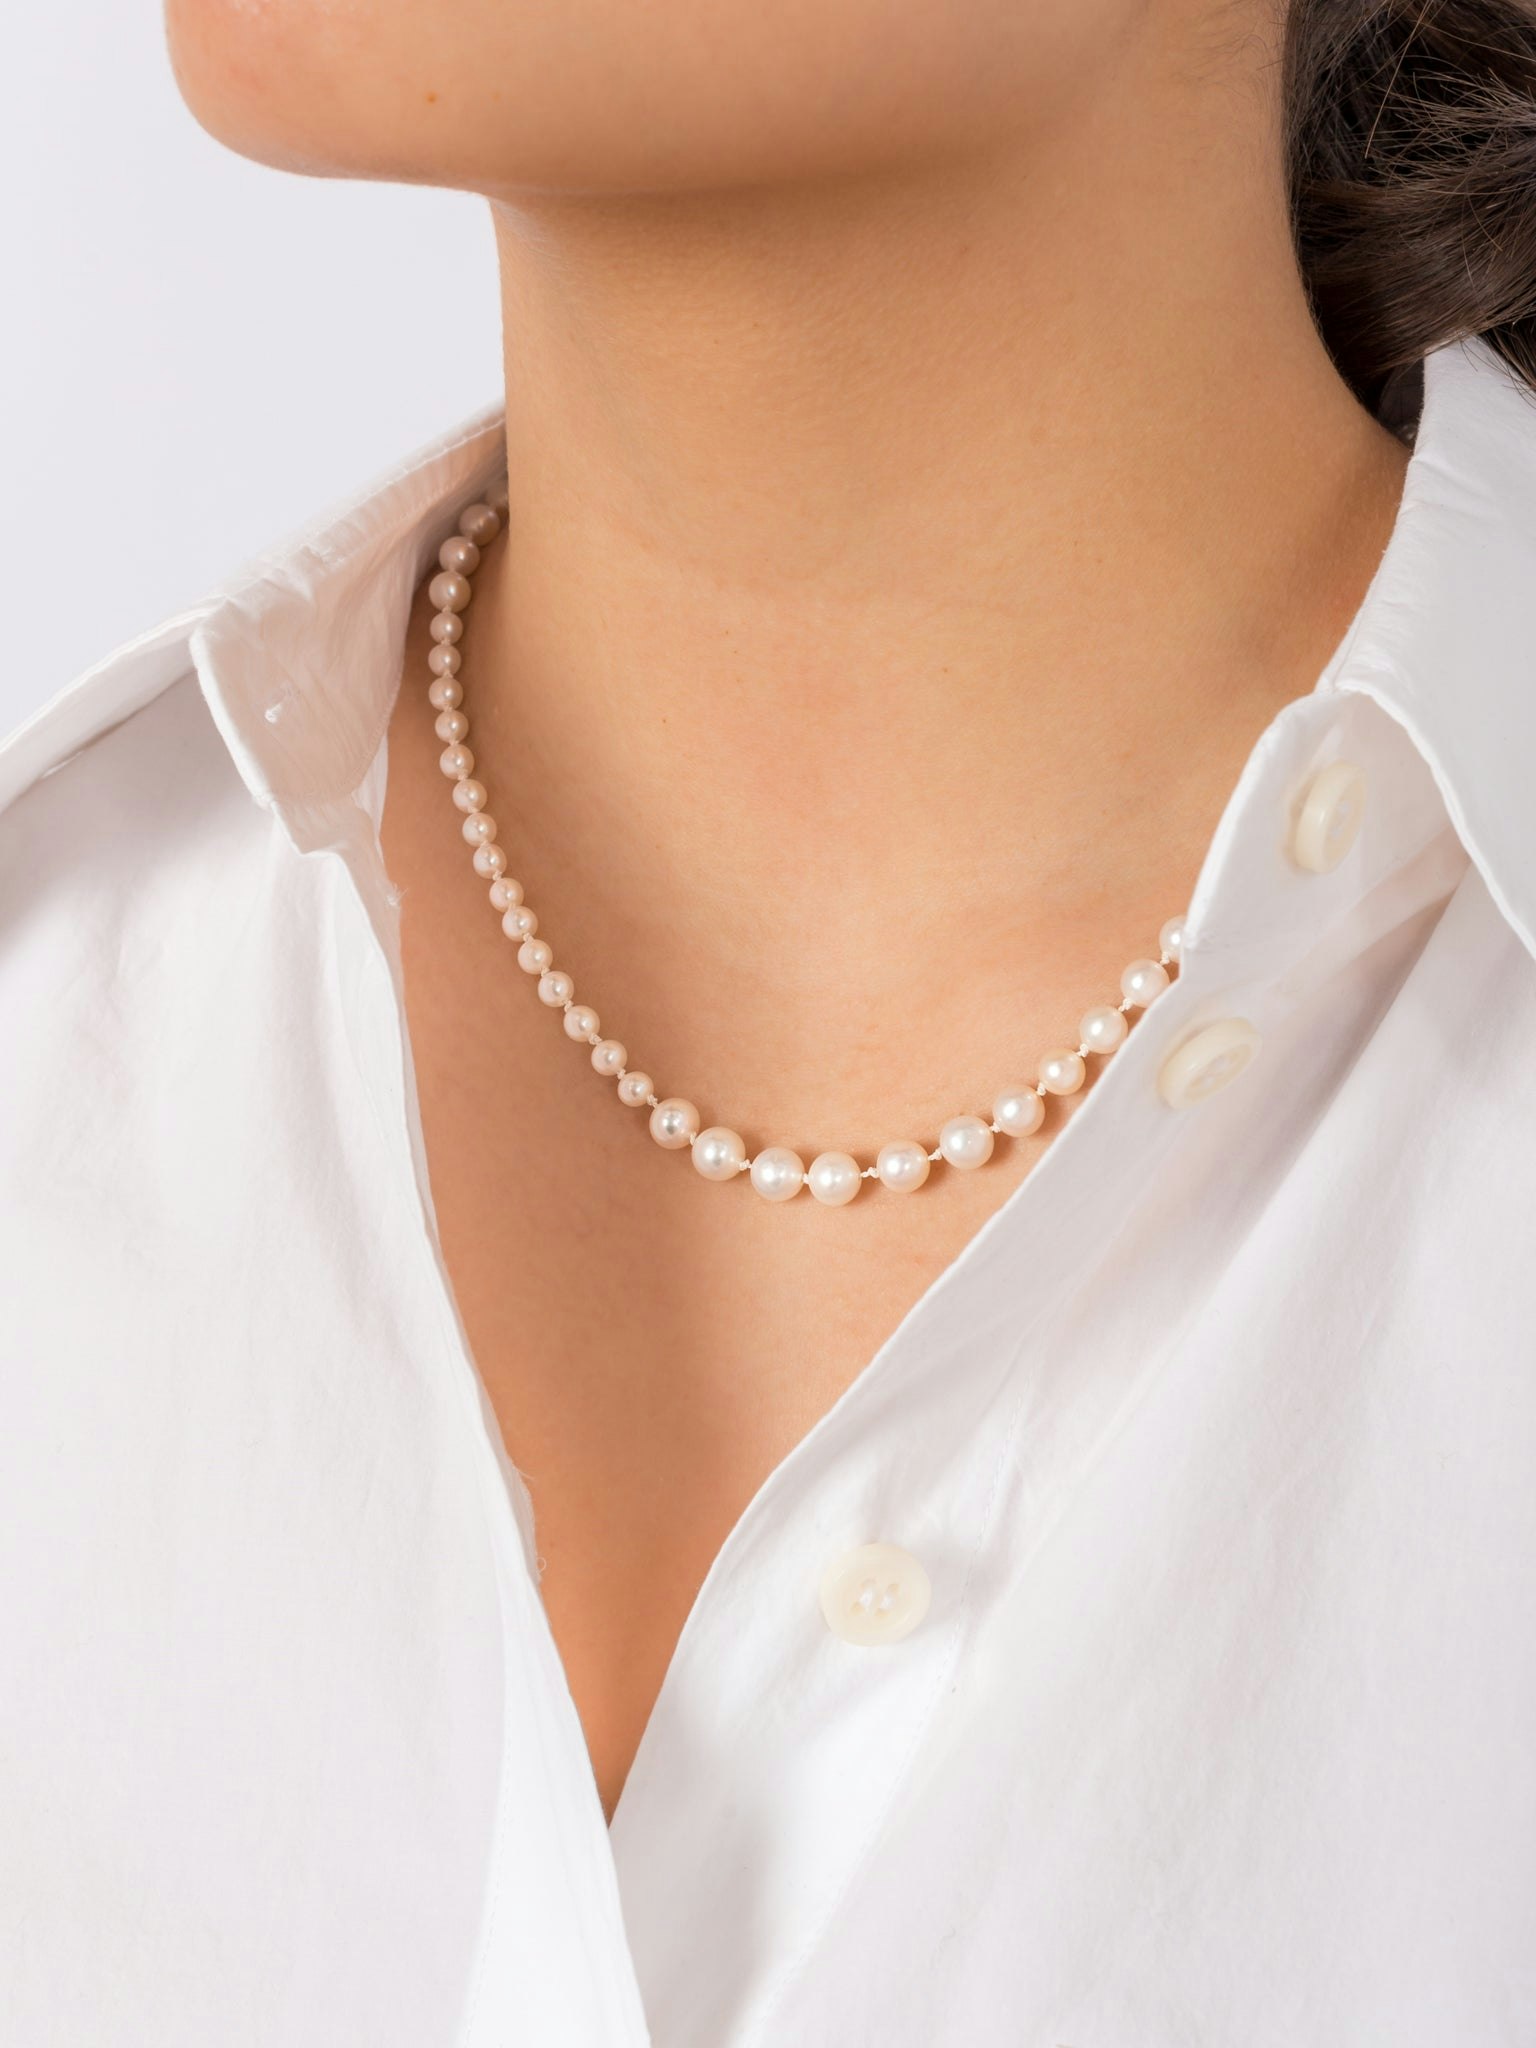 Aura pearl necklace photo 4